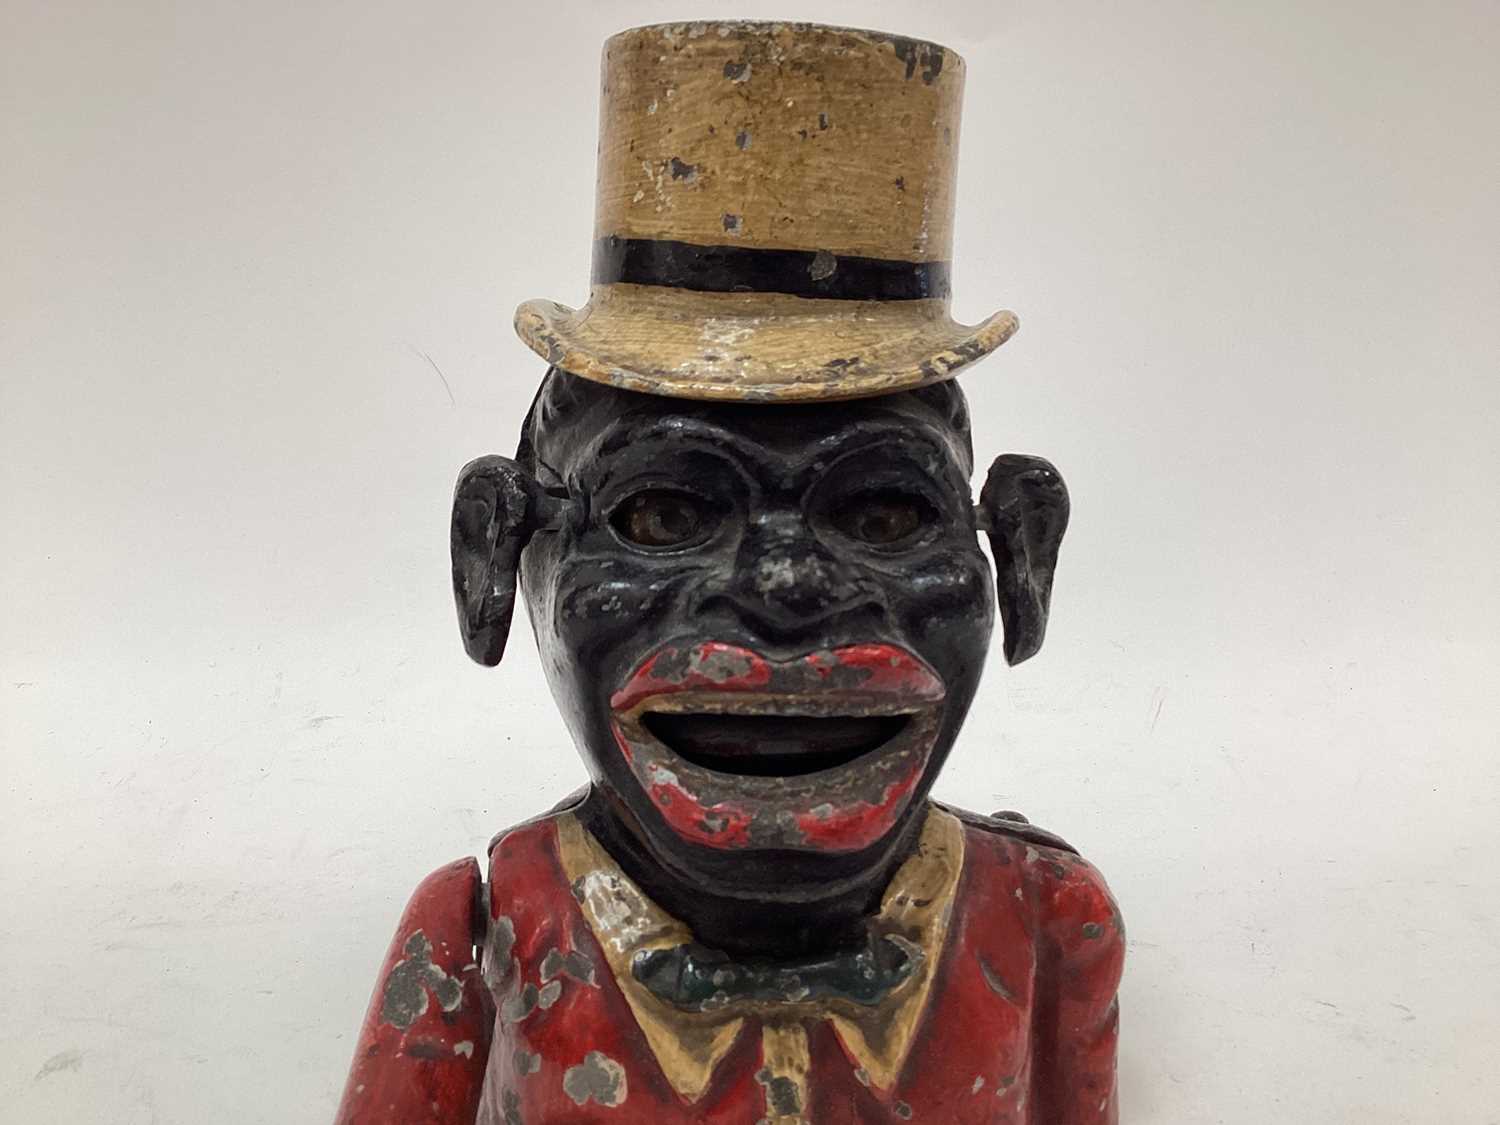 1920s/30s Starkie’s cast alloy “Gentleman with Top Hat” mechanical money box, with moveable arm, ton - Image 4 of 8